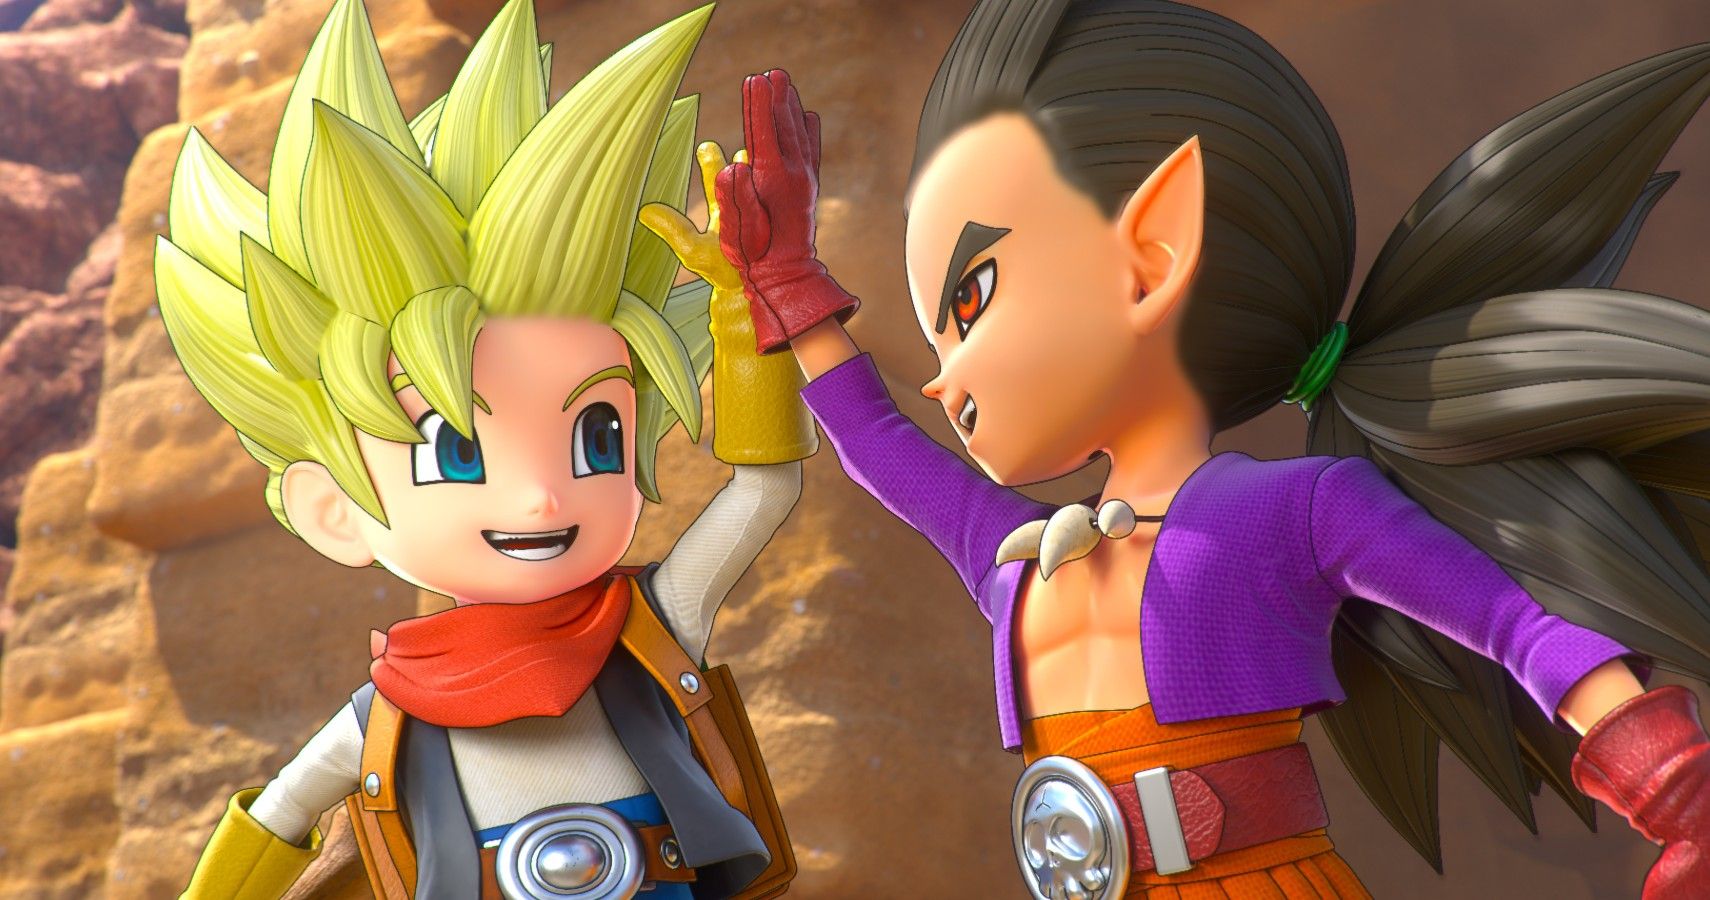 dragon quest builders 2 multiplayer